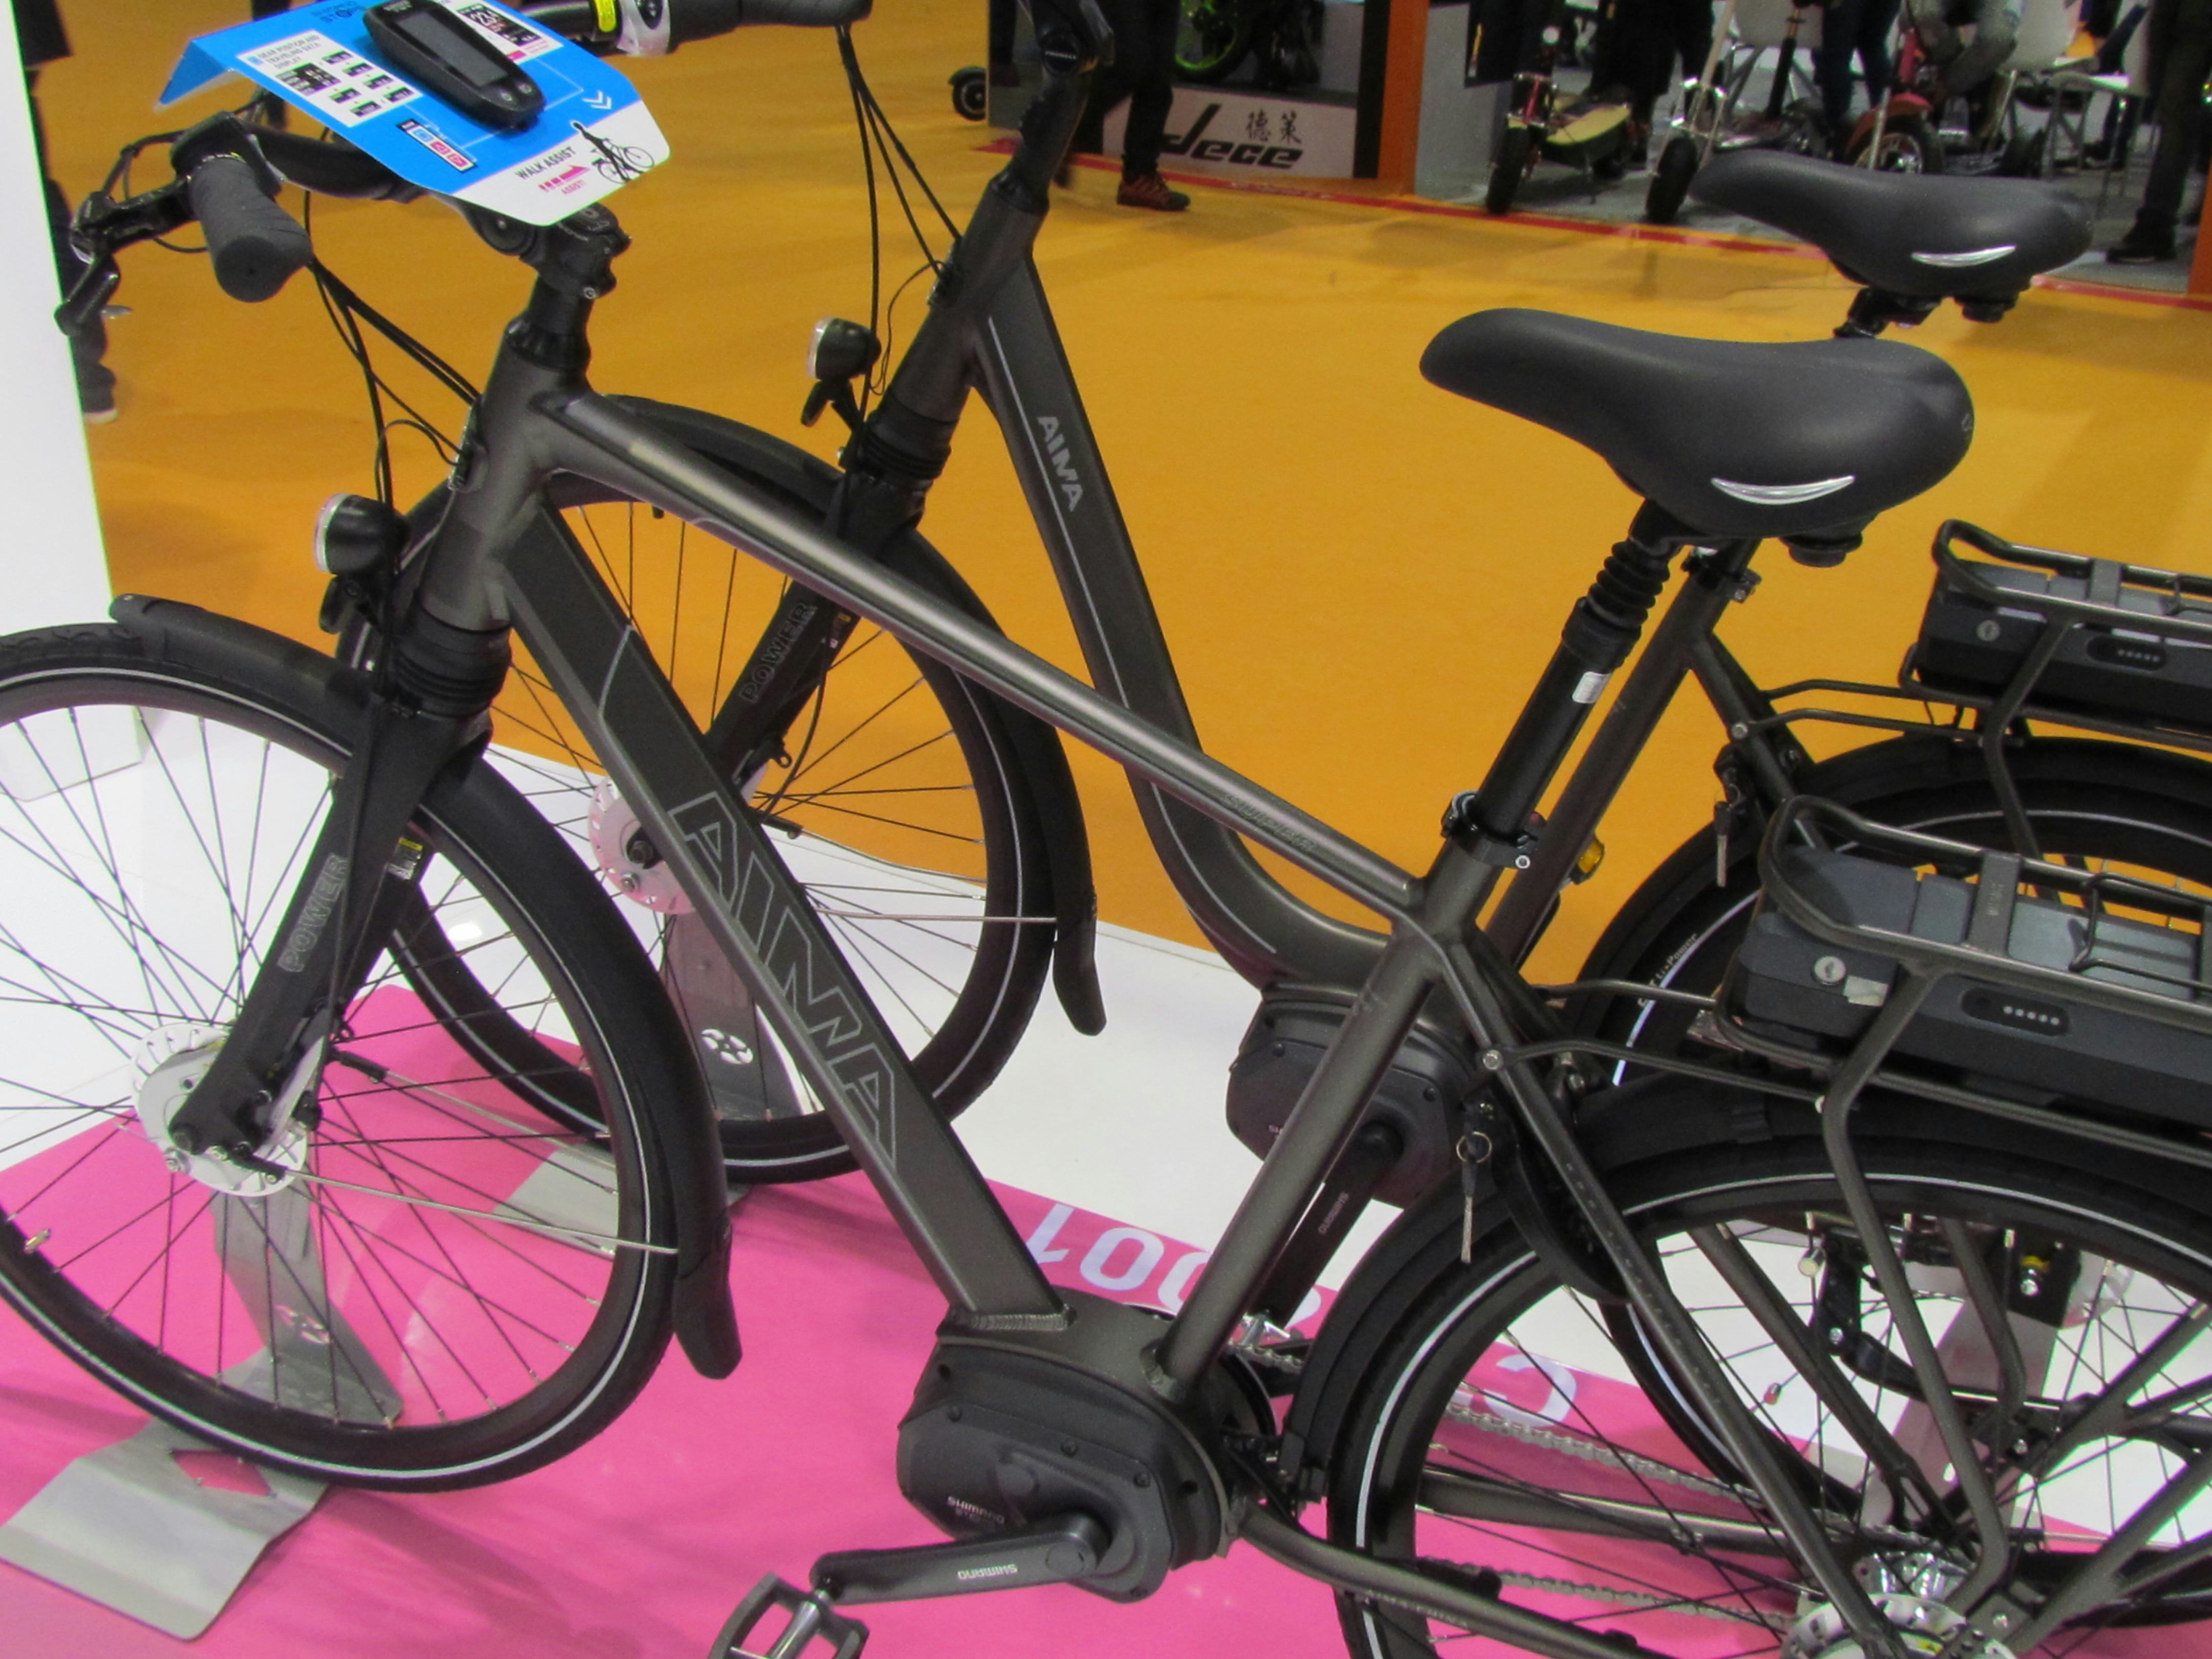 AIMA, a multi-million e-bike maker in China’s, sells such Shimano STEPS equipped e-bikes for about 1,000 USD. – Photo Bike Europe